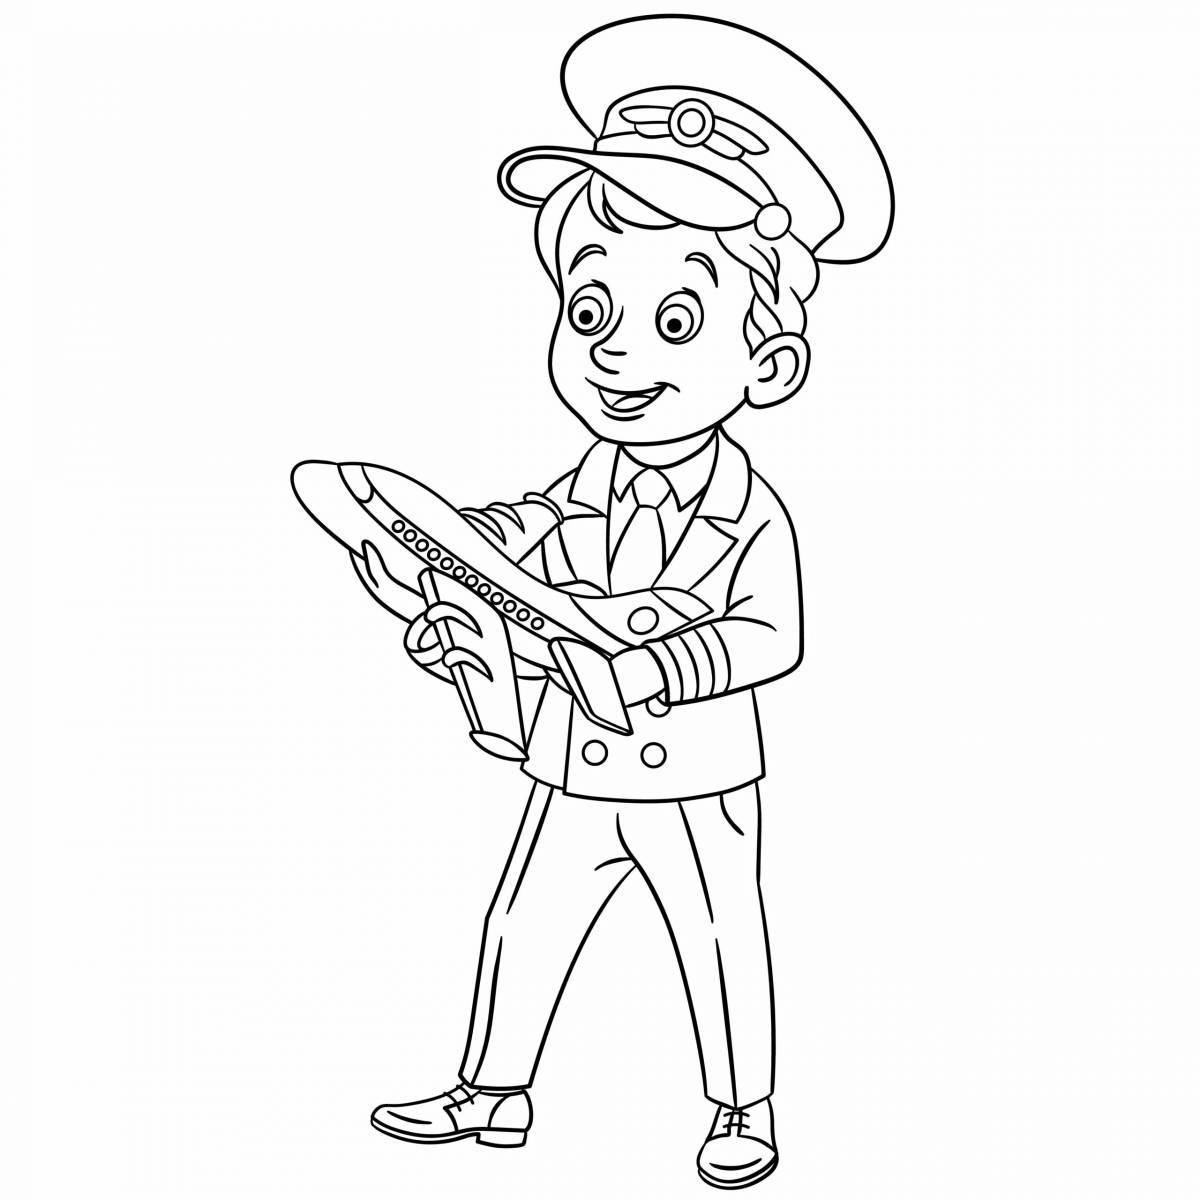 Fun coloring book for little ones